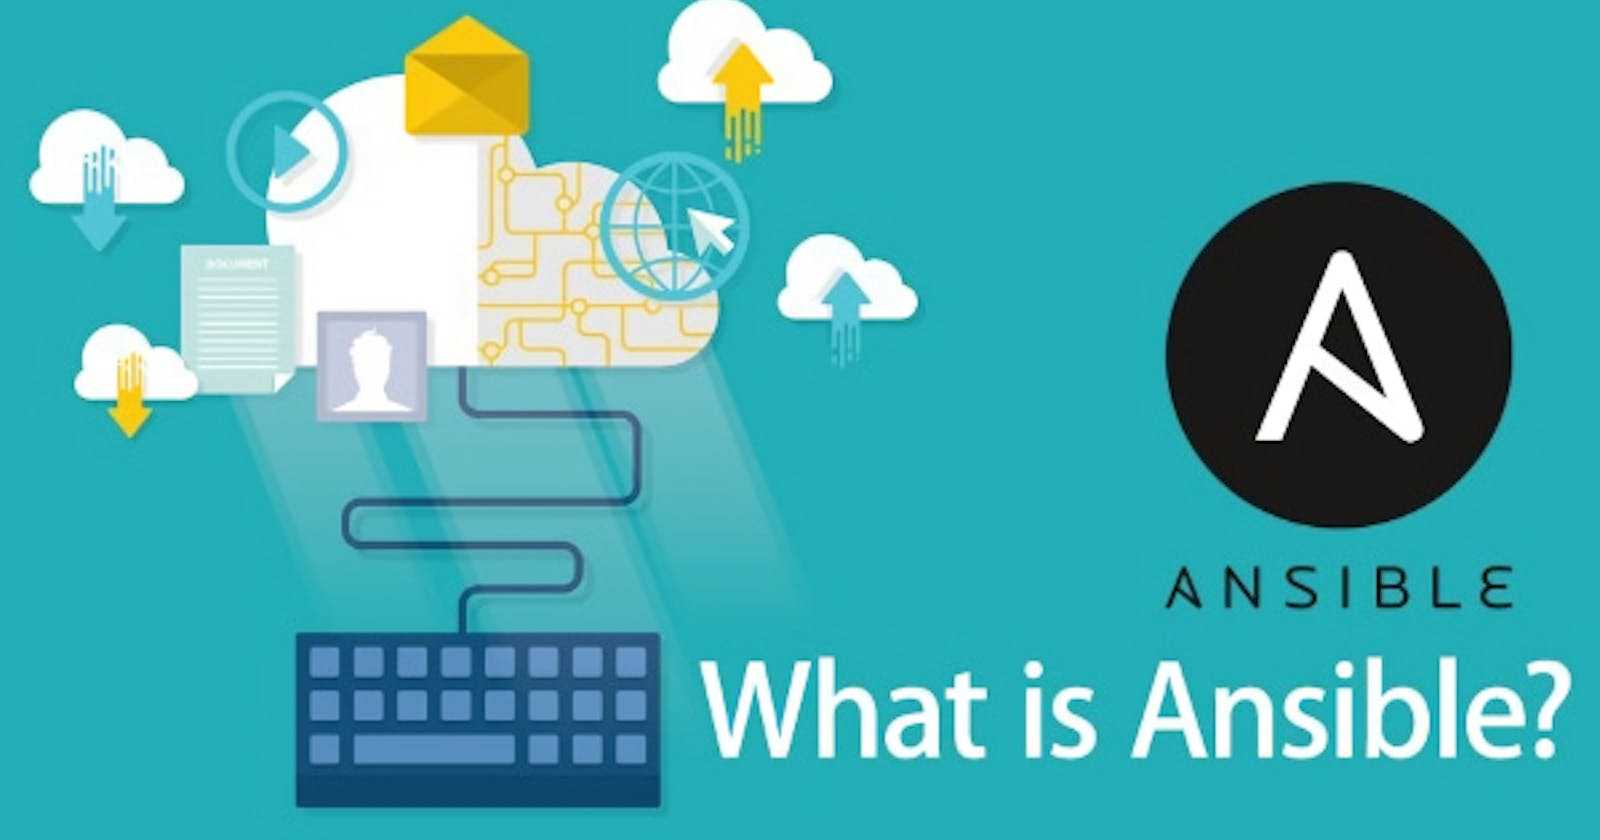 Ansible - The Complete IT Automation